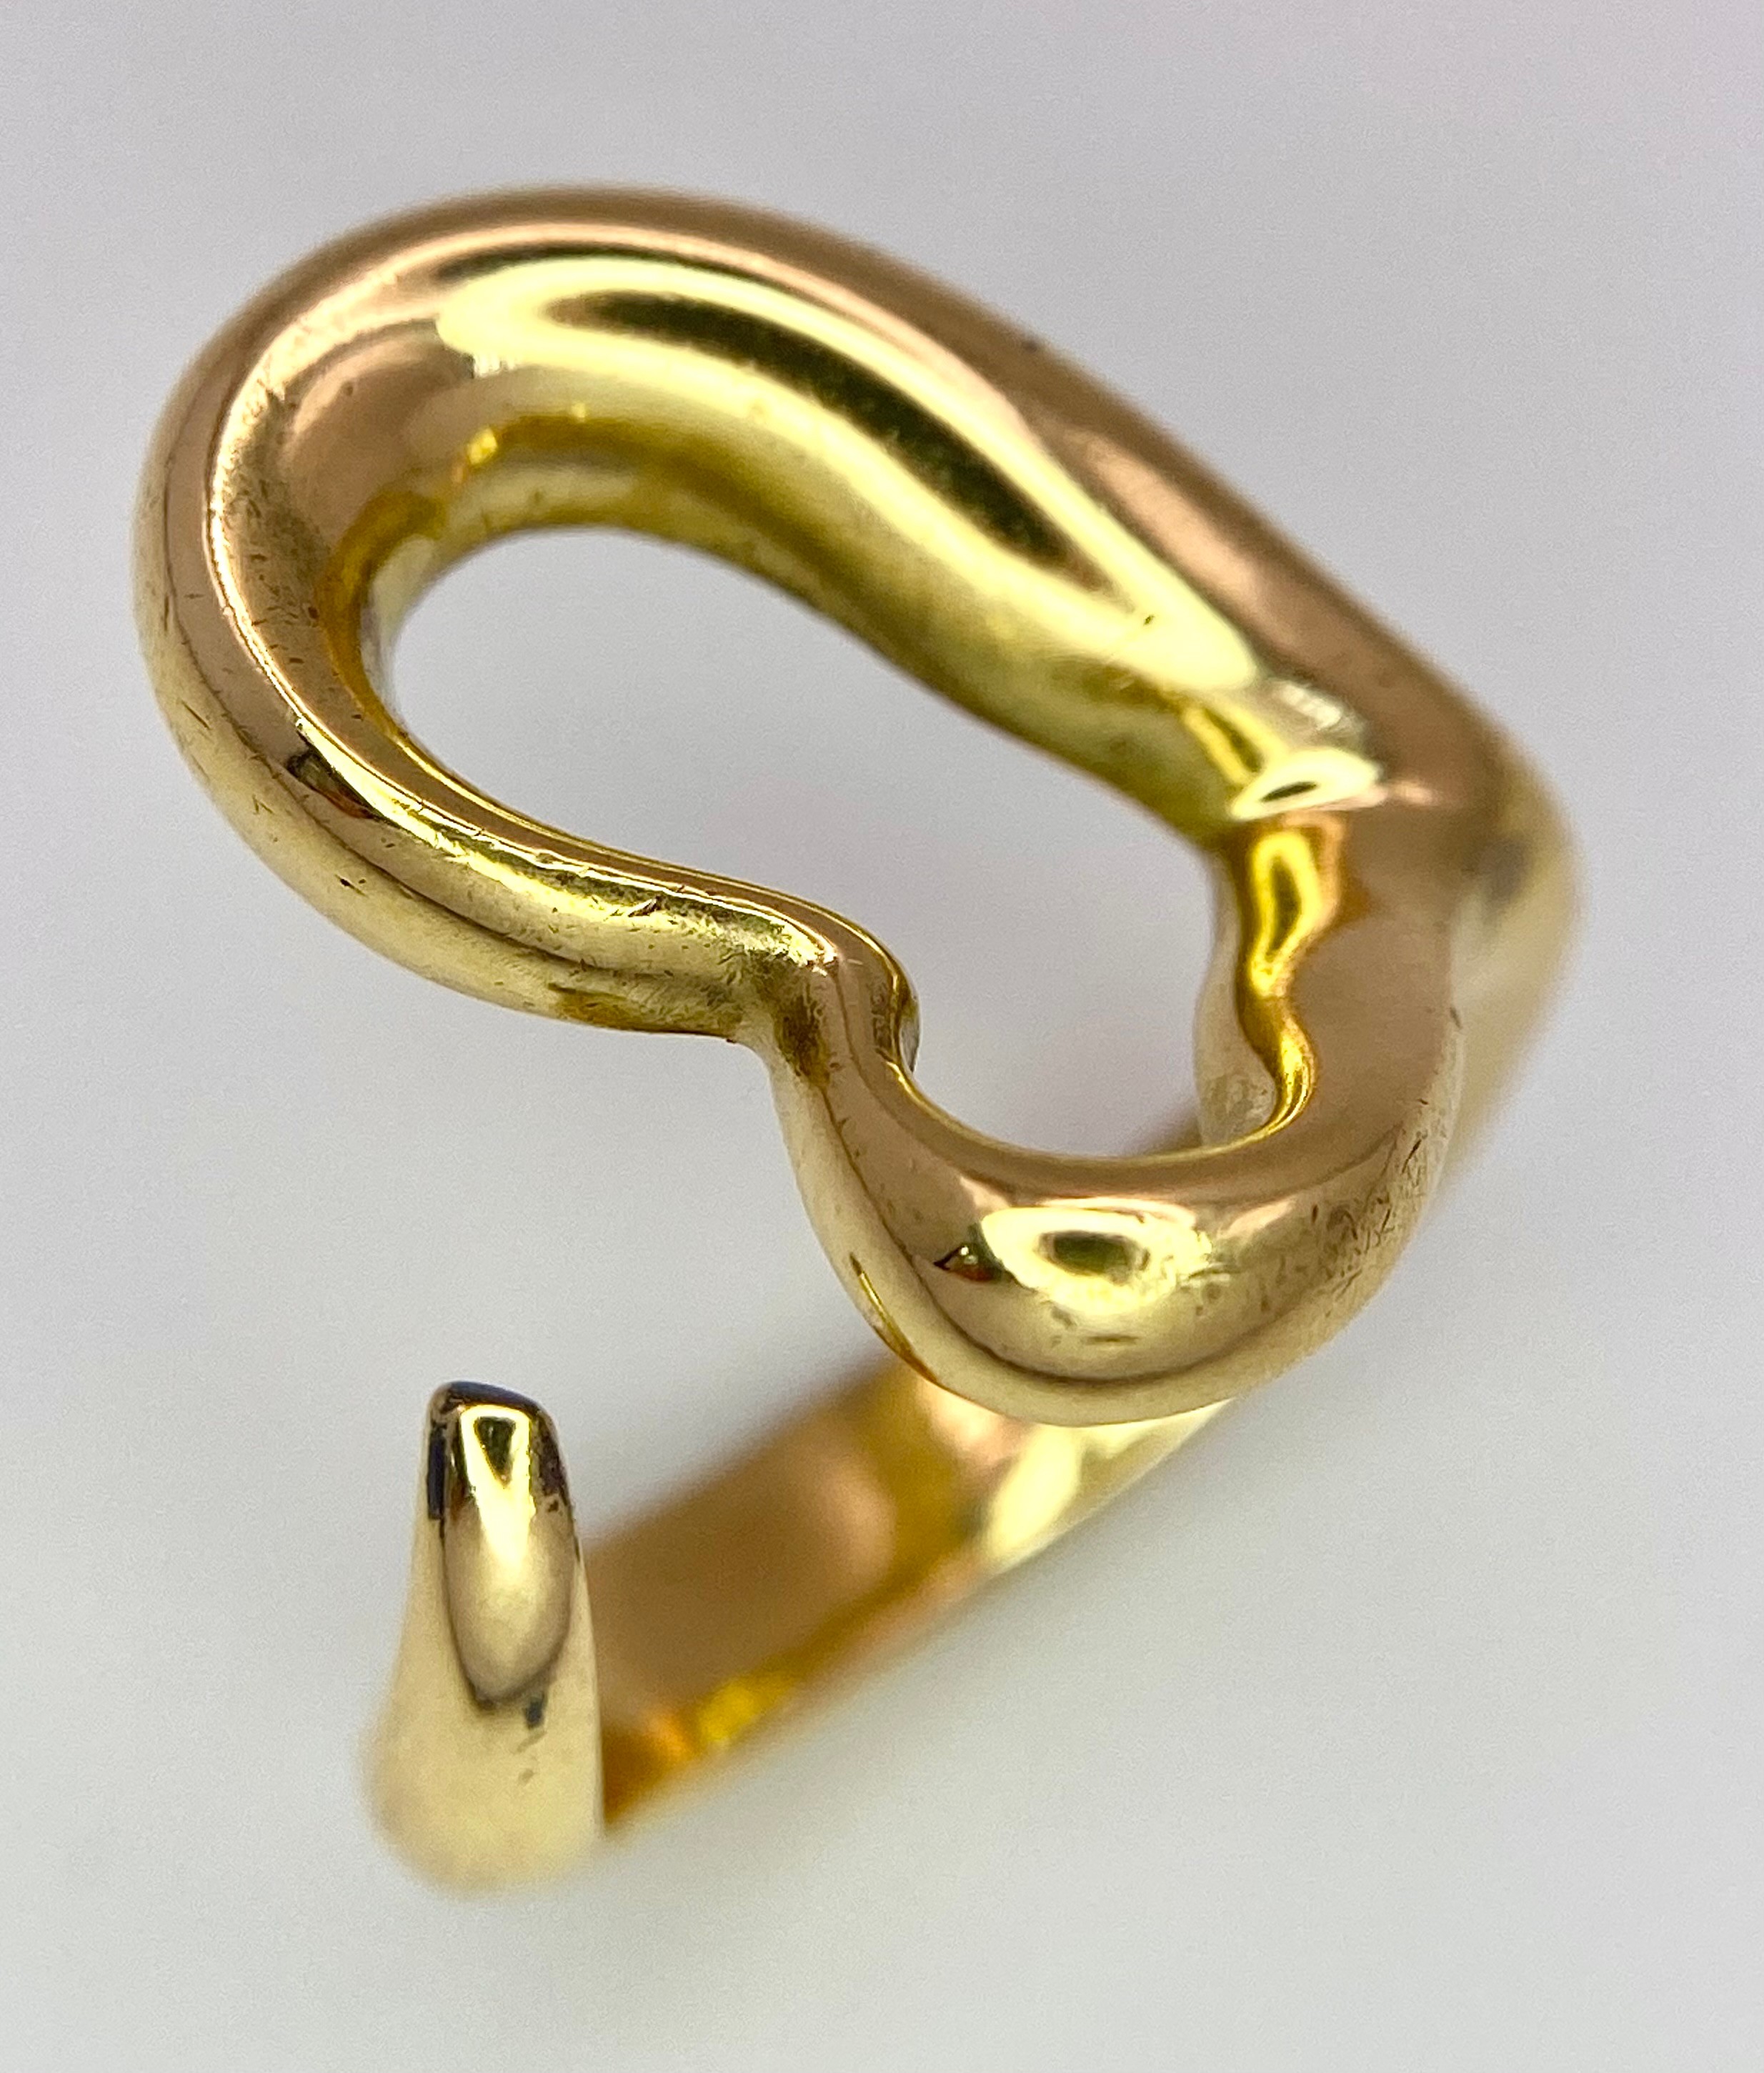 A 18K YELLOW GOLD TIFFANY & CO ELSA PERETTI HEART RING 10.1G SIZE H 1/2 SC 9062 - Image 2 of 8